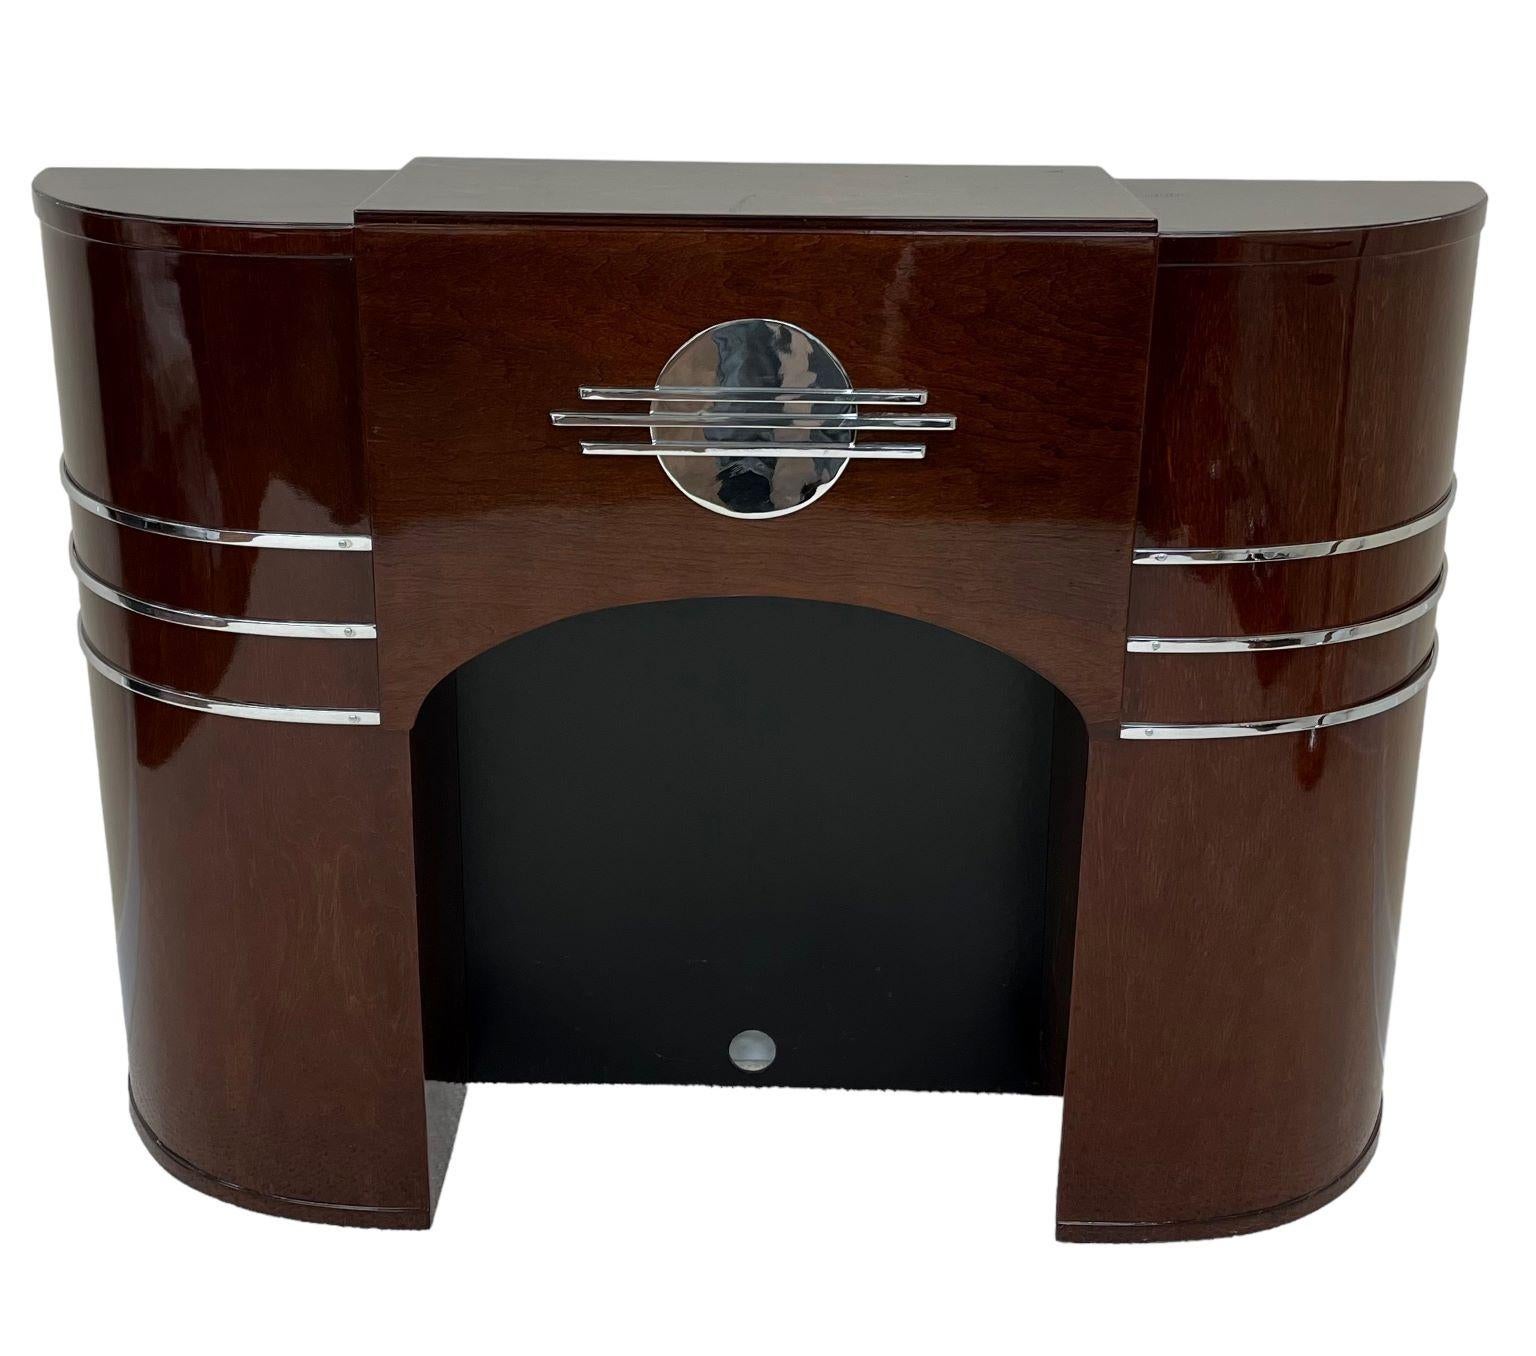 Rare Art Deco streamline faux fireplace mantle. Remarkable craftsmanship and great detail with the polished chrome accents. Professionally restored in maple stained mahogany. Dimensions 54 inches wide by 12 inches deep and 40 inches high.